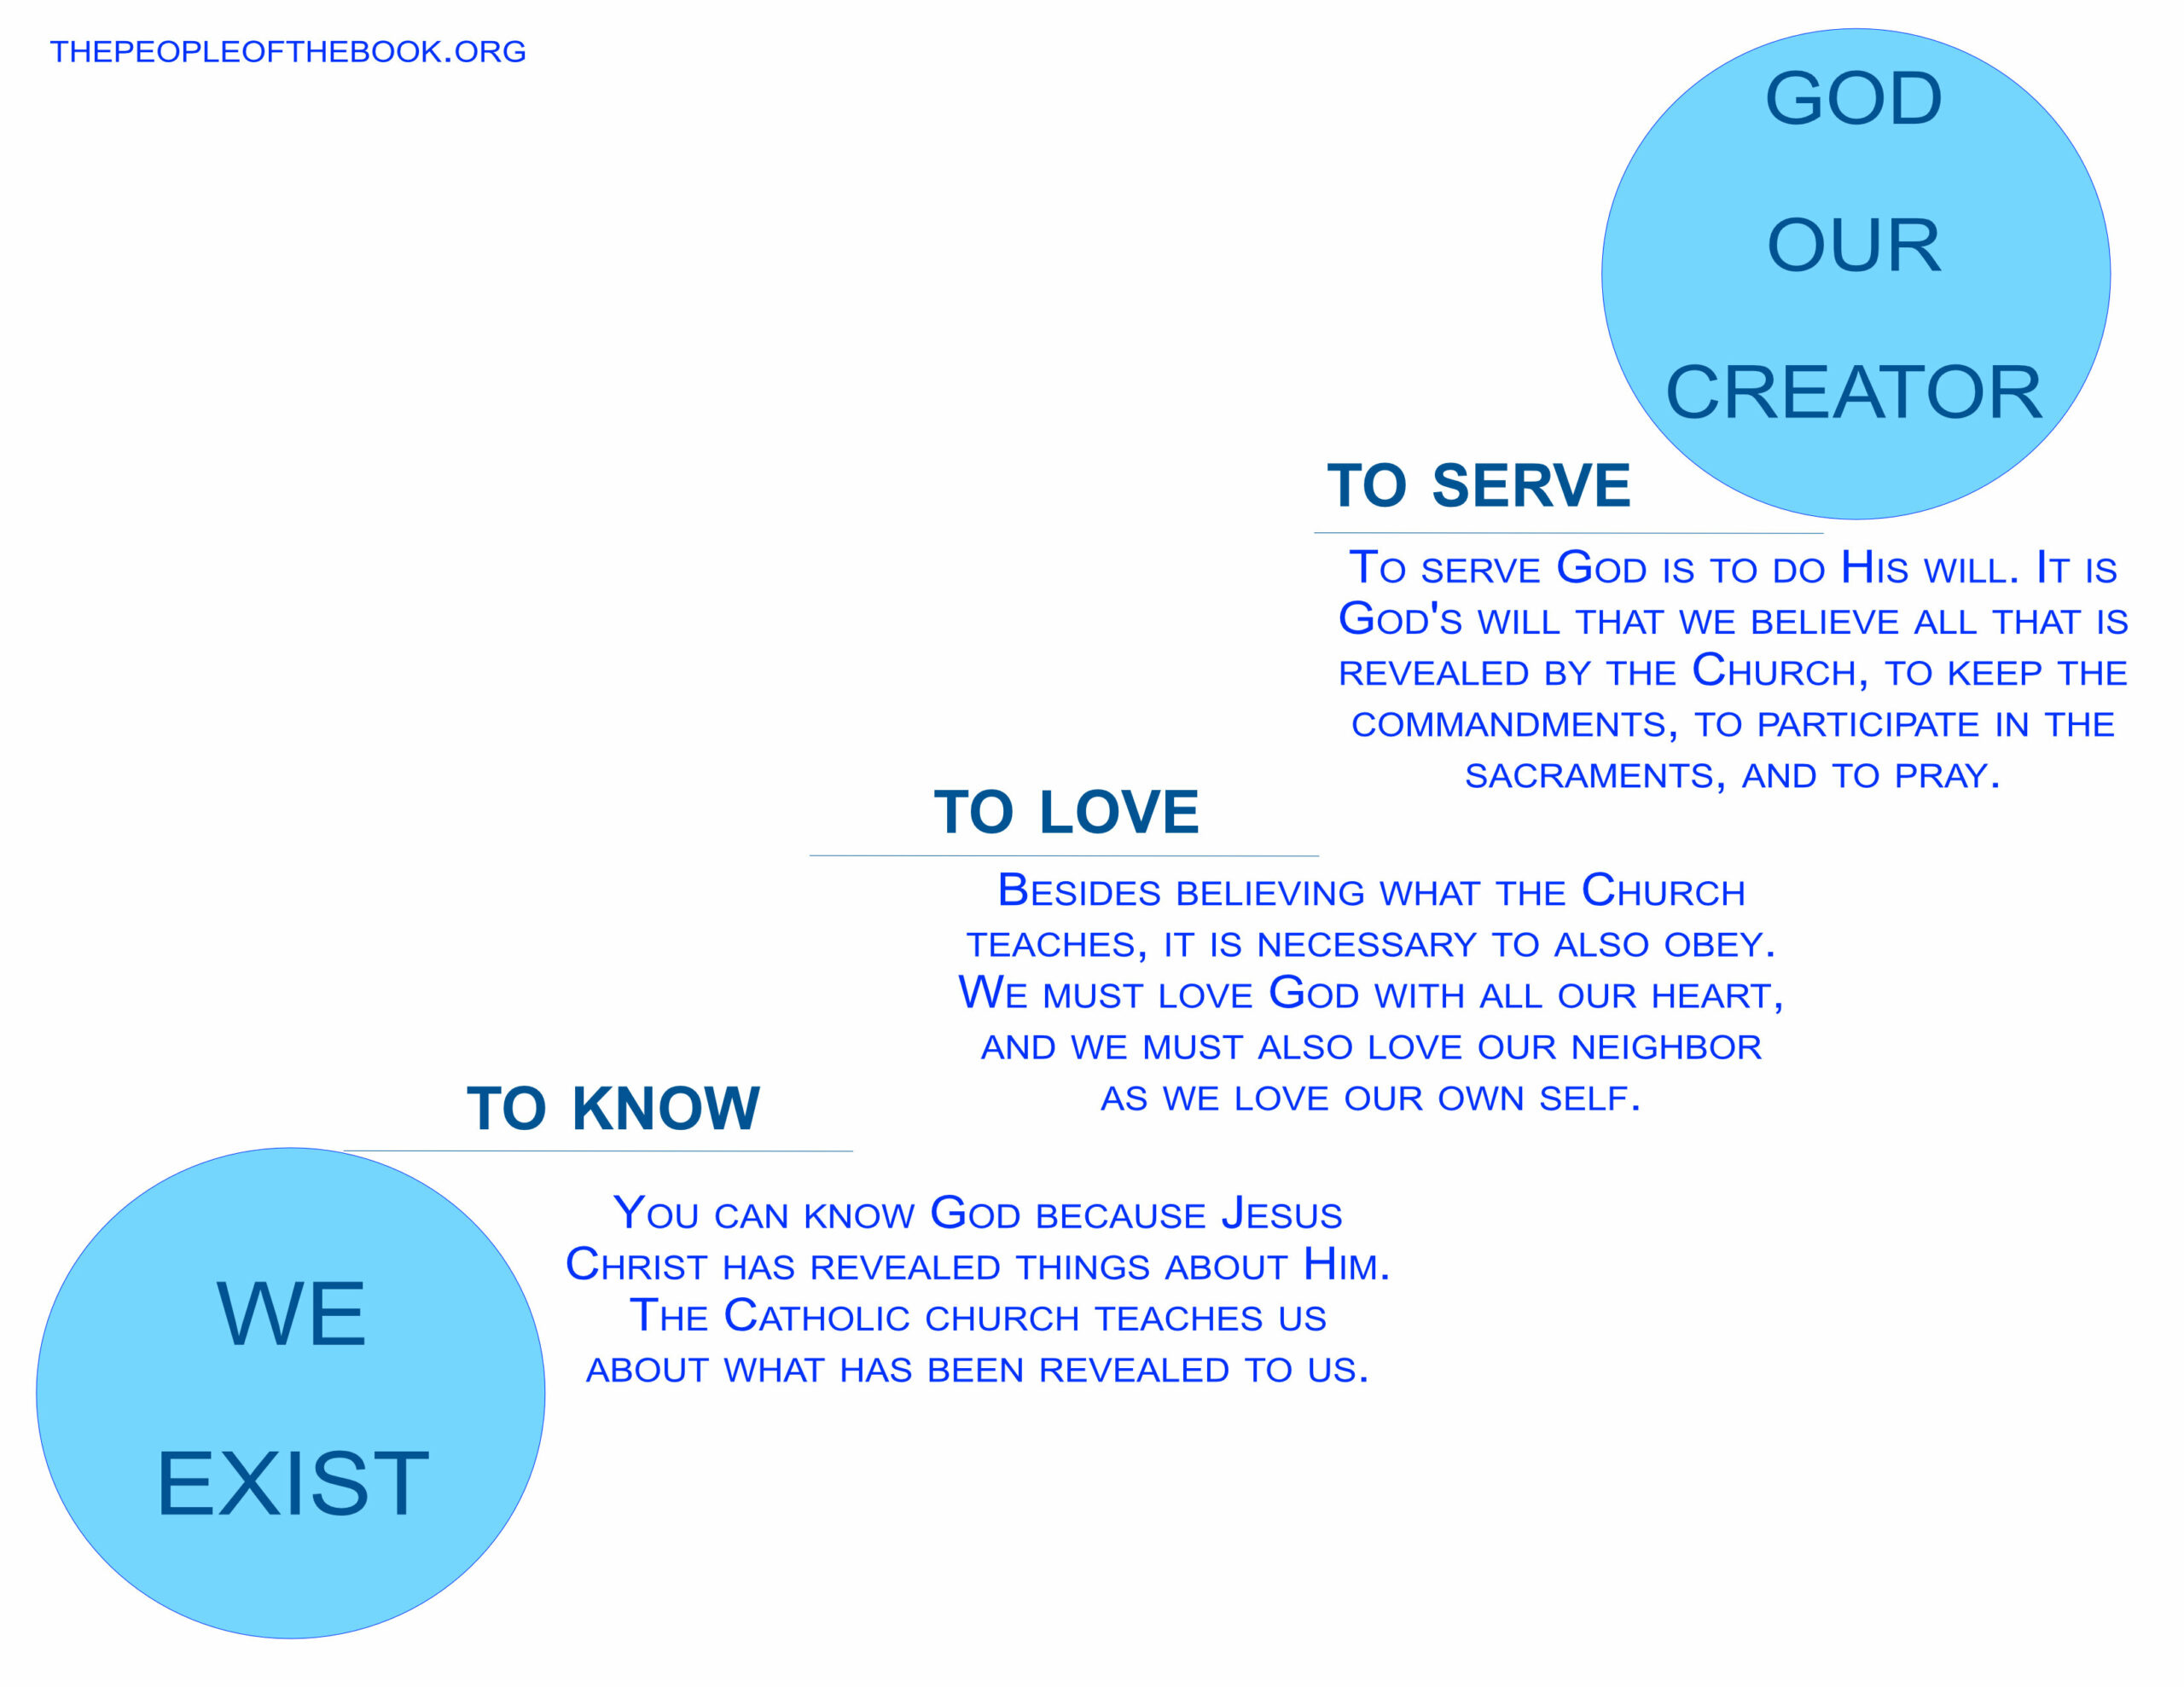 We exist to know, to love, and to serve God our creator